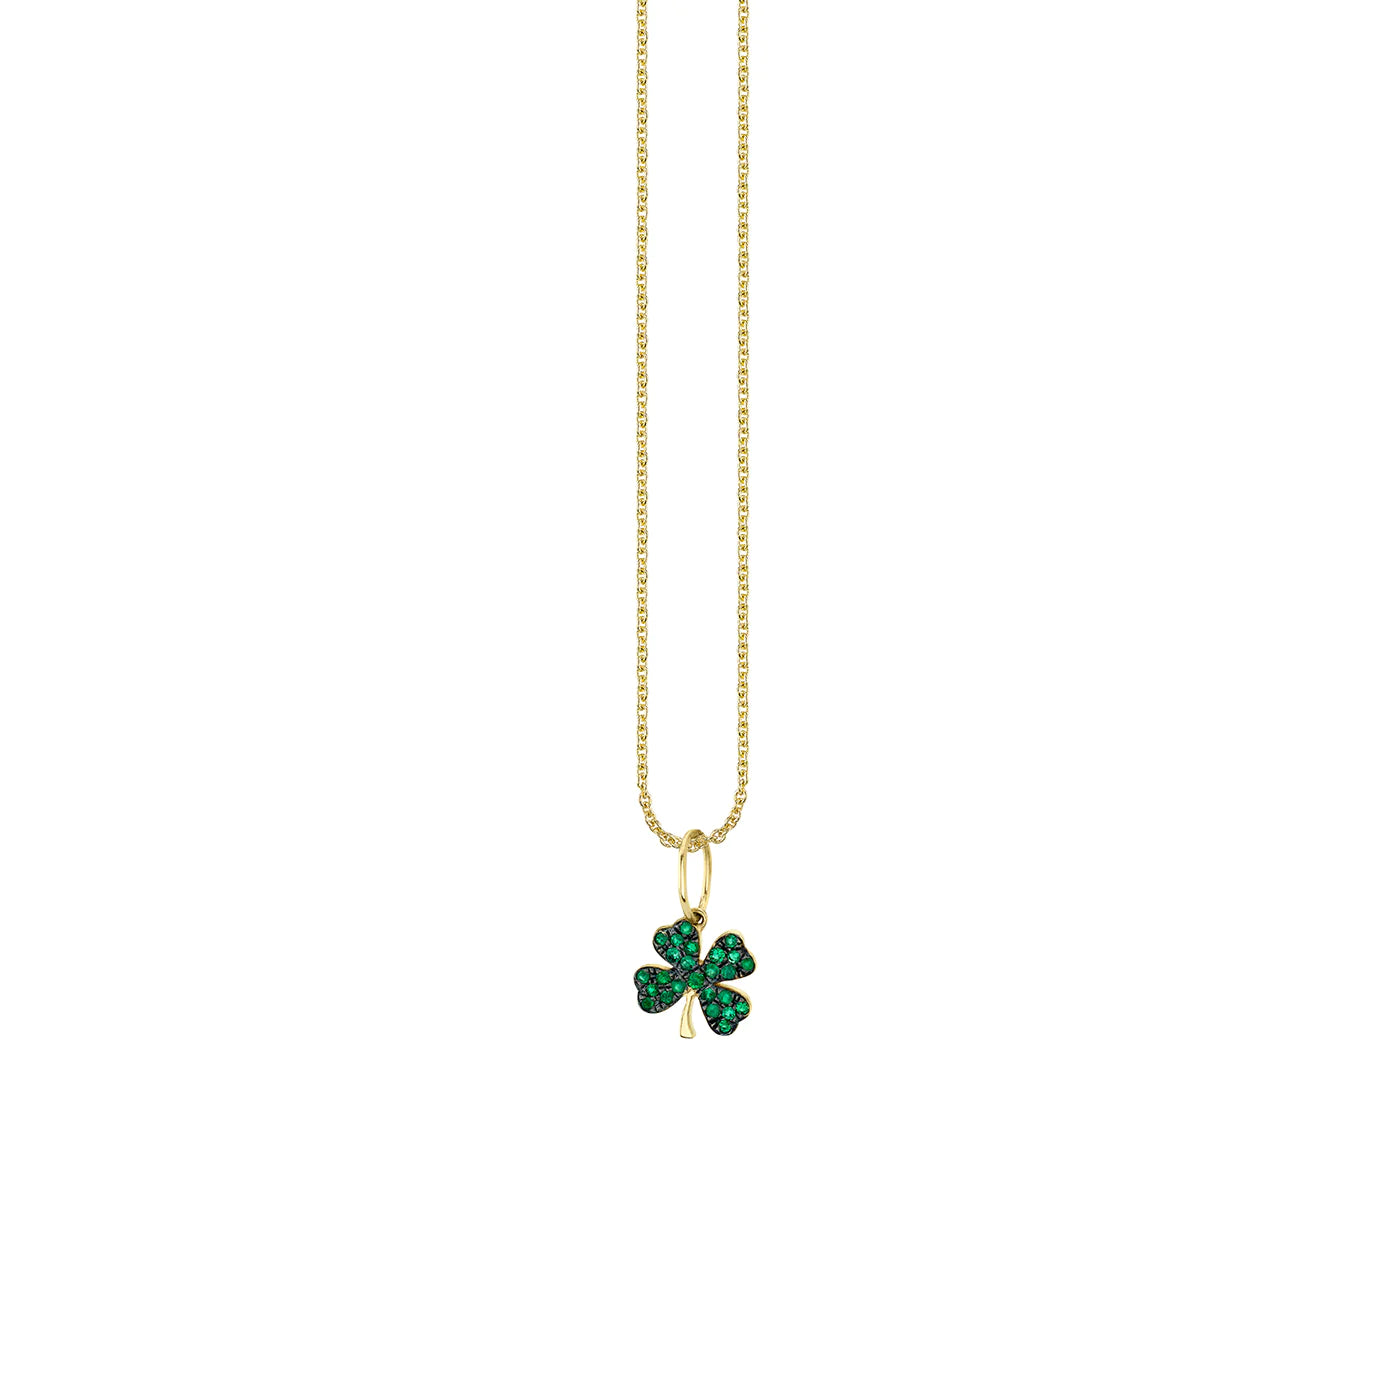 Sydney Evan Small Emerald Clover Charm Necklace - Be On Park